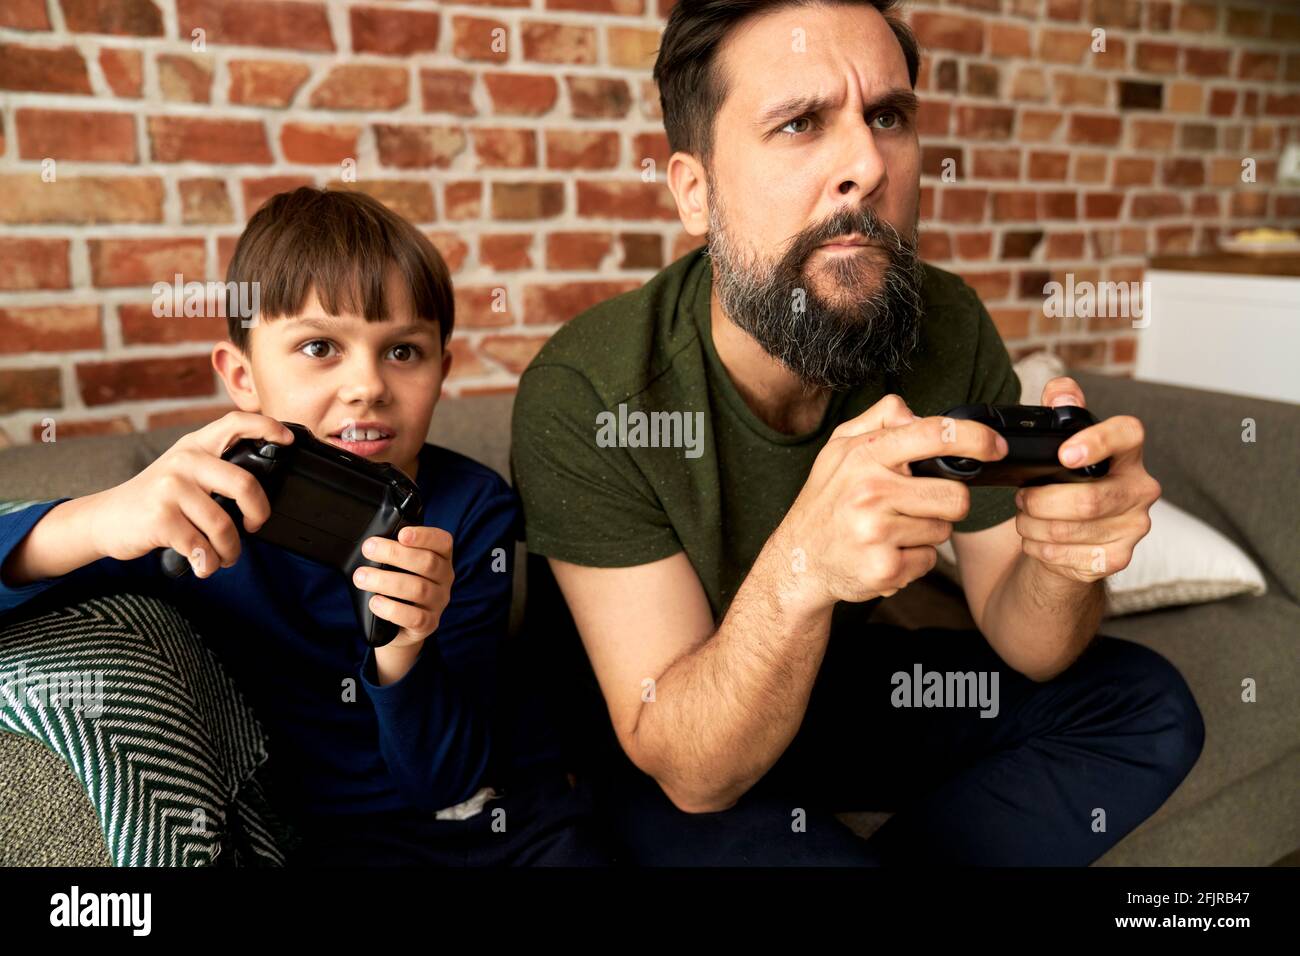 Focused father and son sitting and playing video game together Stock Photo